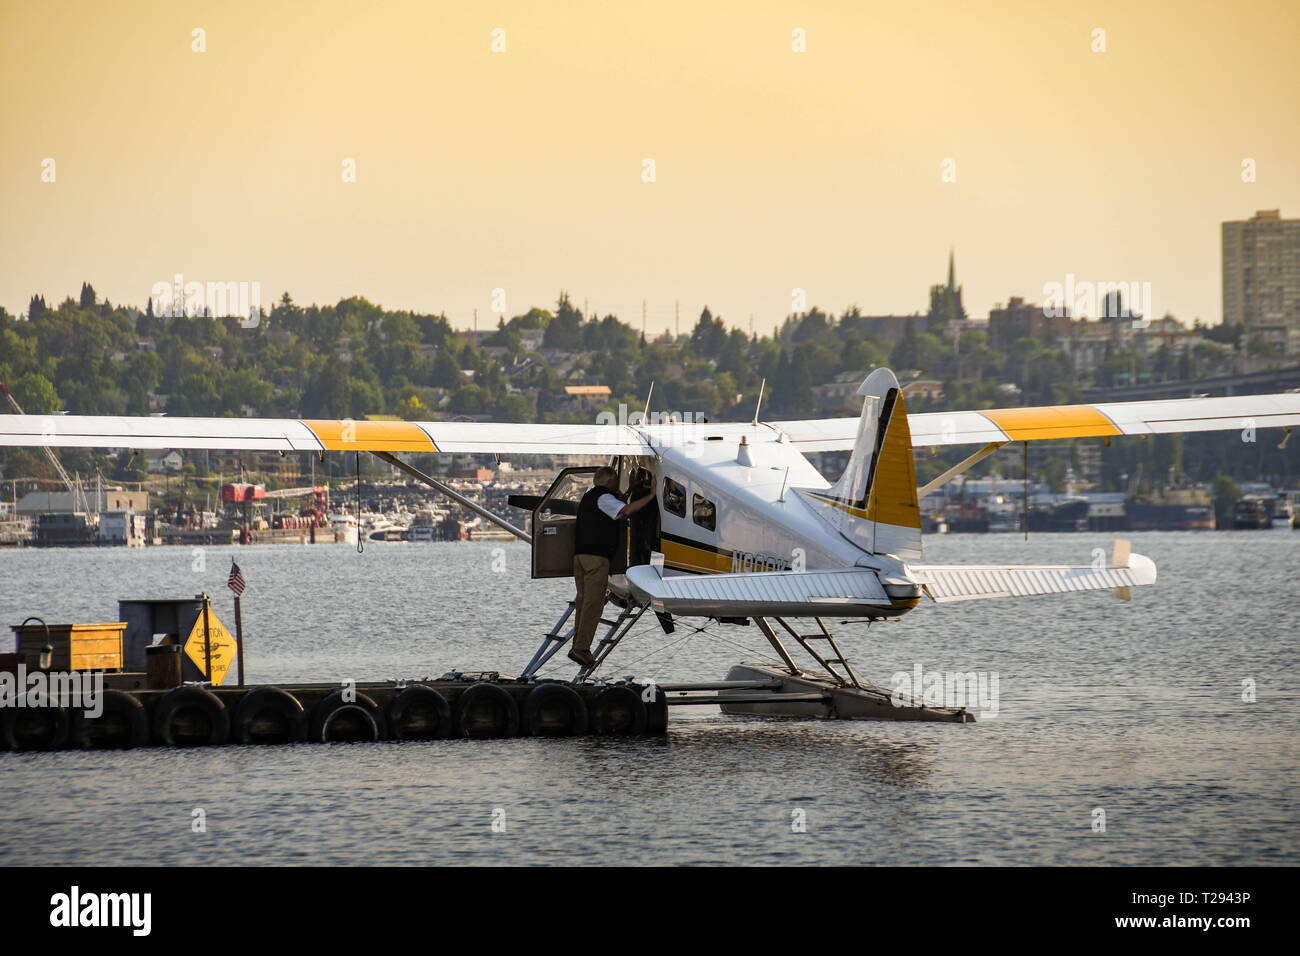 SEATTLE WA, USA - JUNE 2018: Pasengers boarding a De Havilland Beaver float plane operated by Kenmore Air leaving the seaplane terminal in Seattle Stock Photo